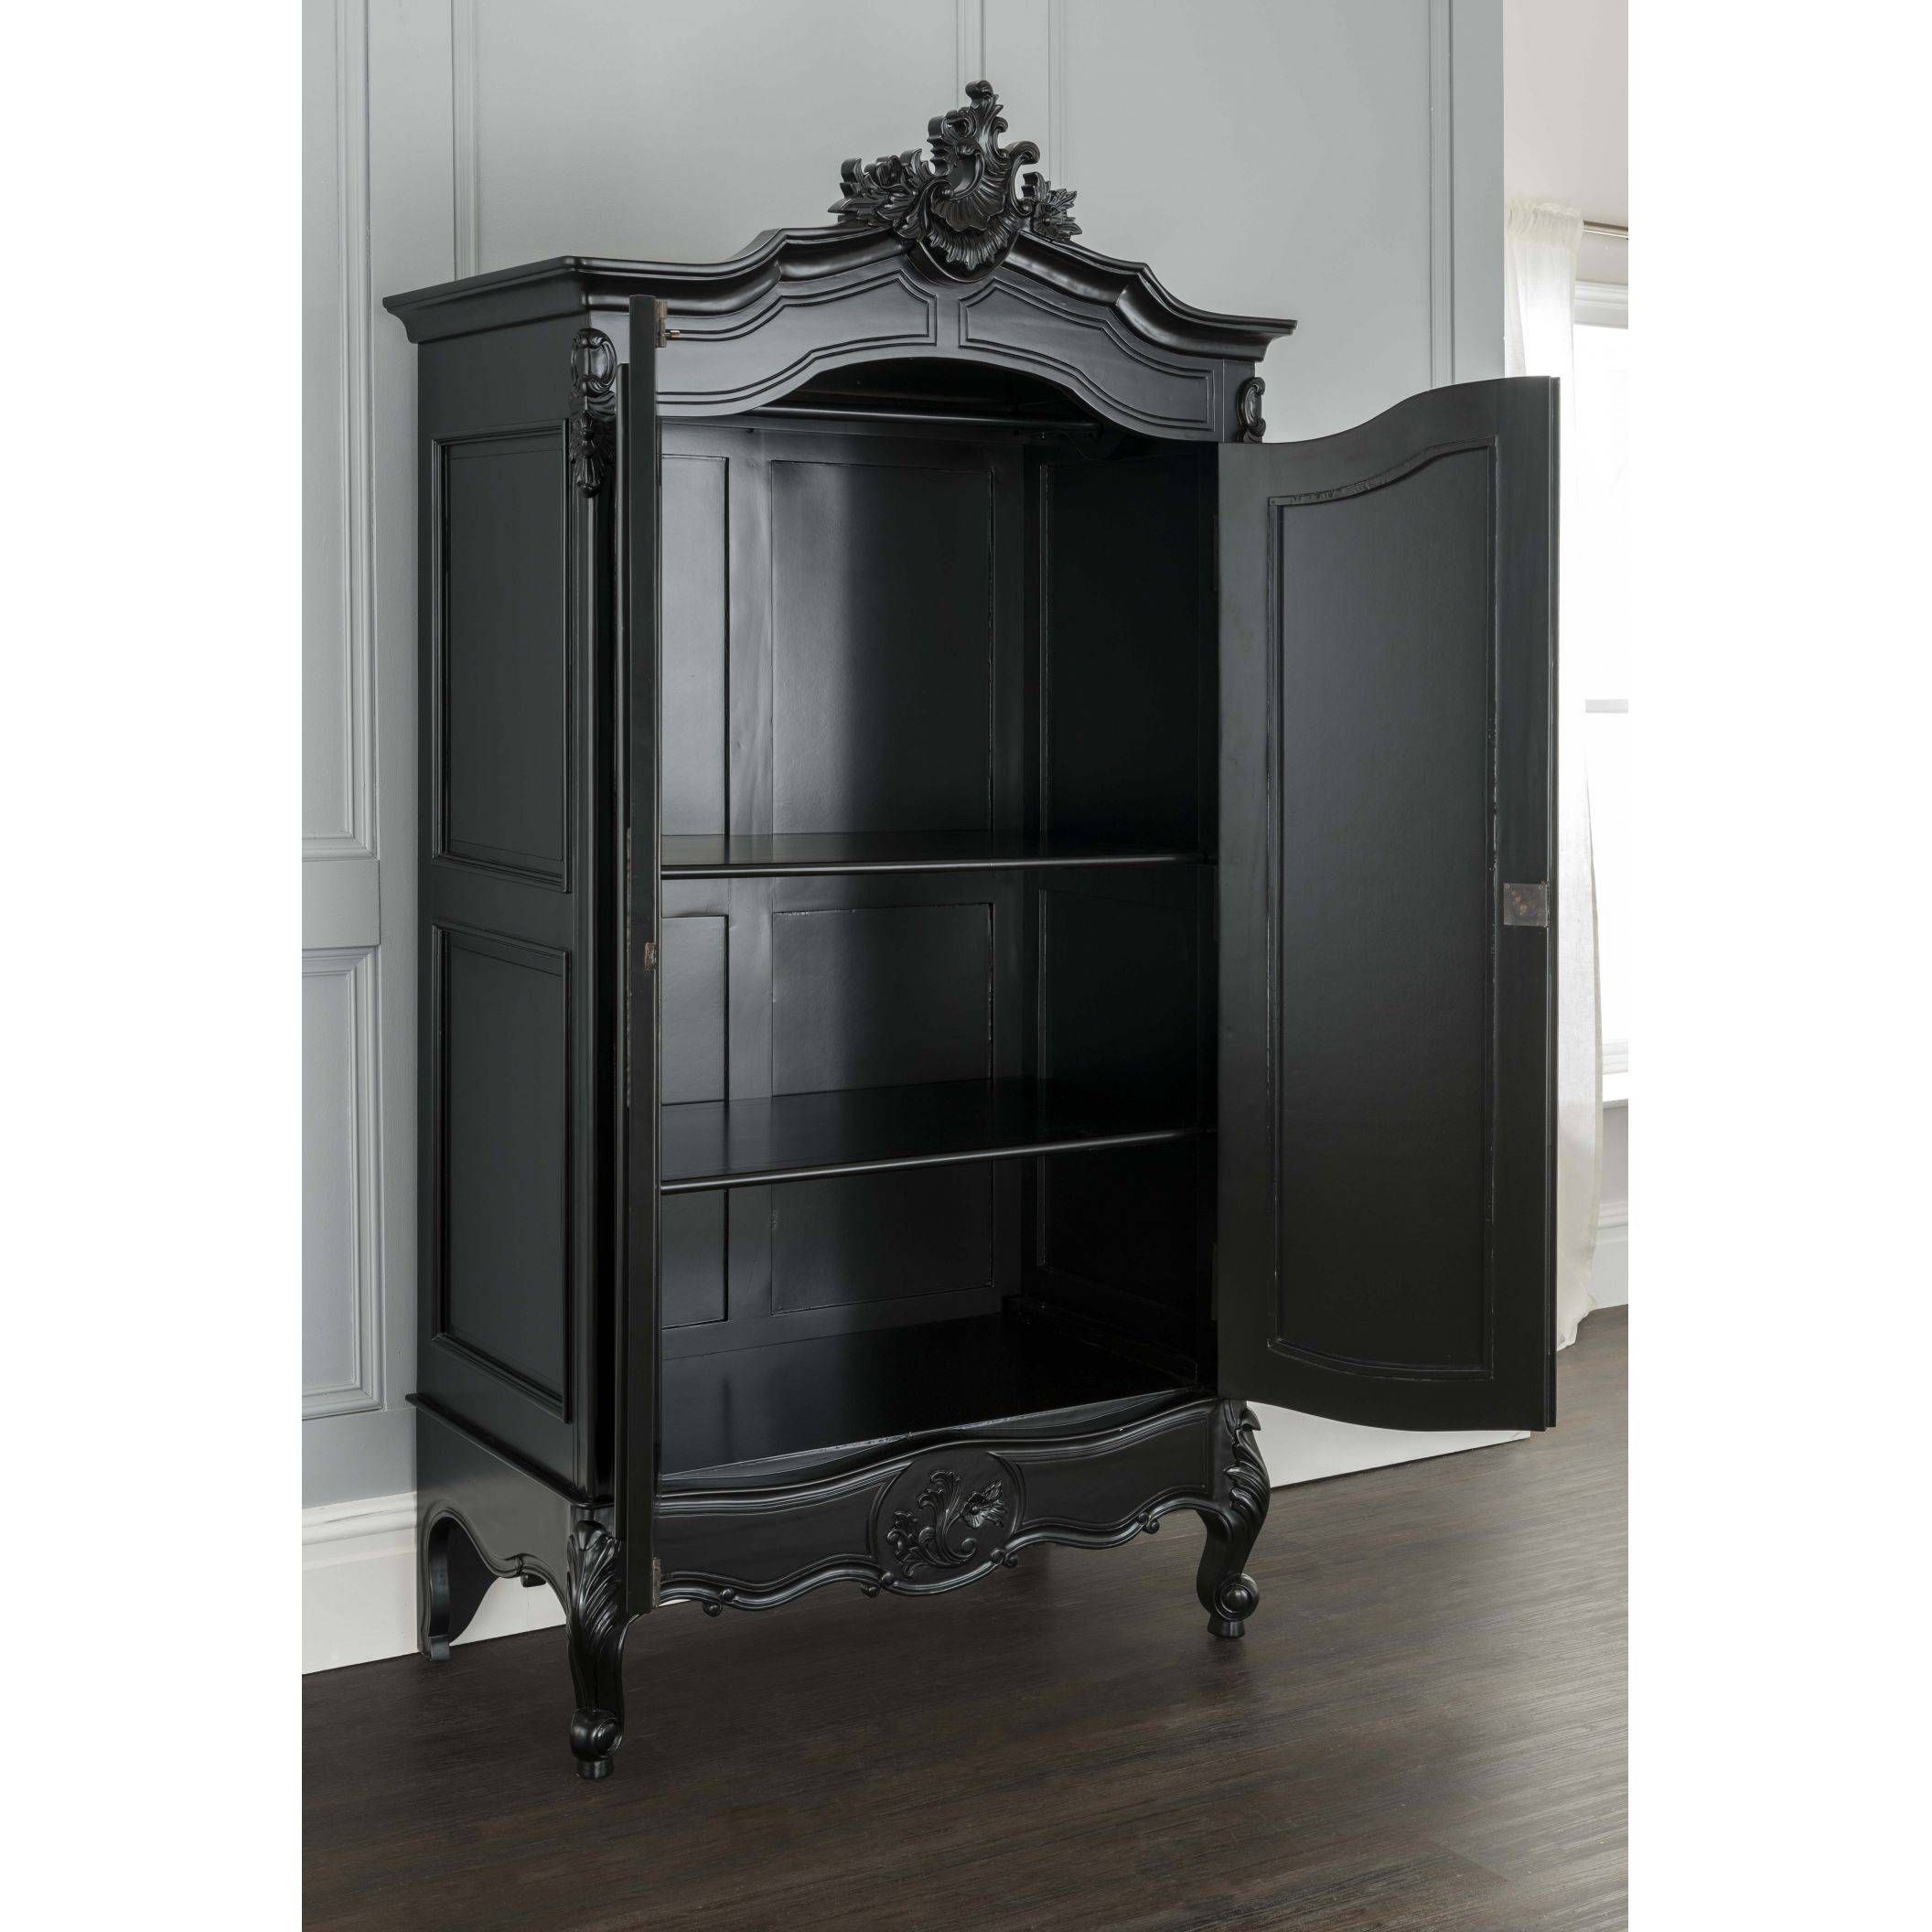 La Rochelle Antique French Wardrobe | Black Furniture Collection Regarding Black French Style Wardrobes (View 4 of 15)